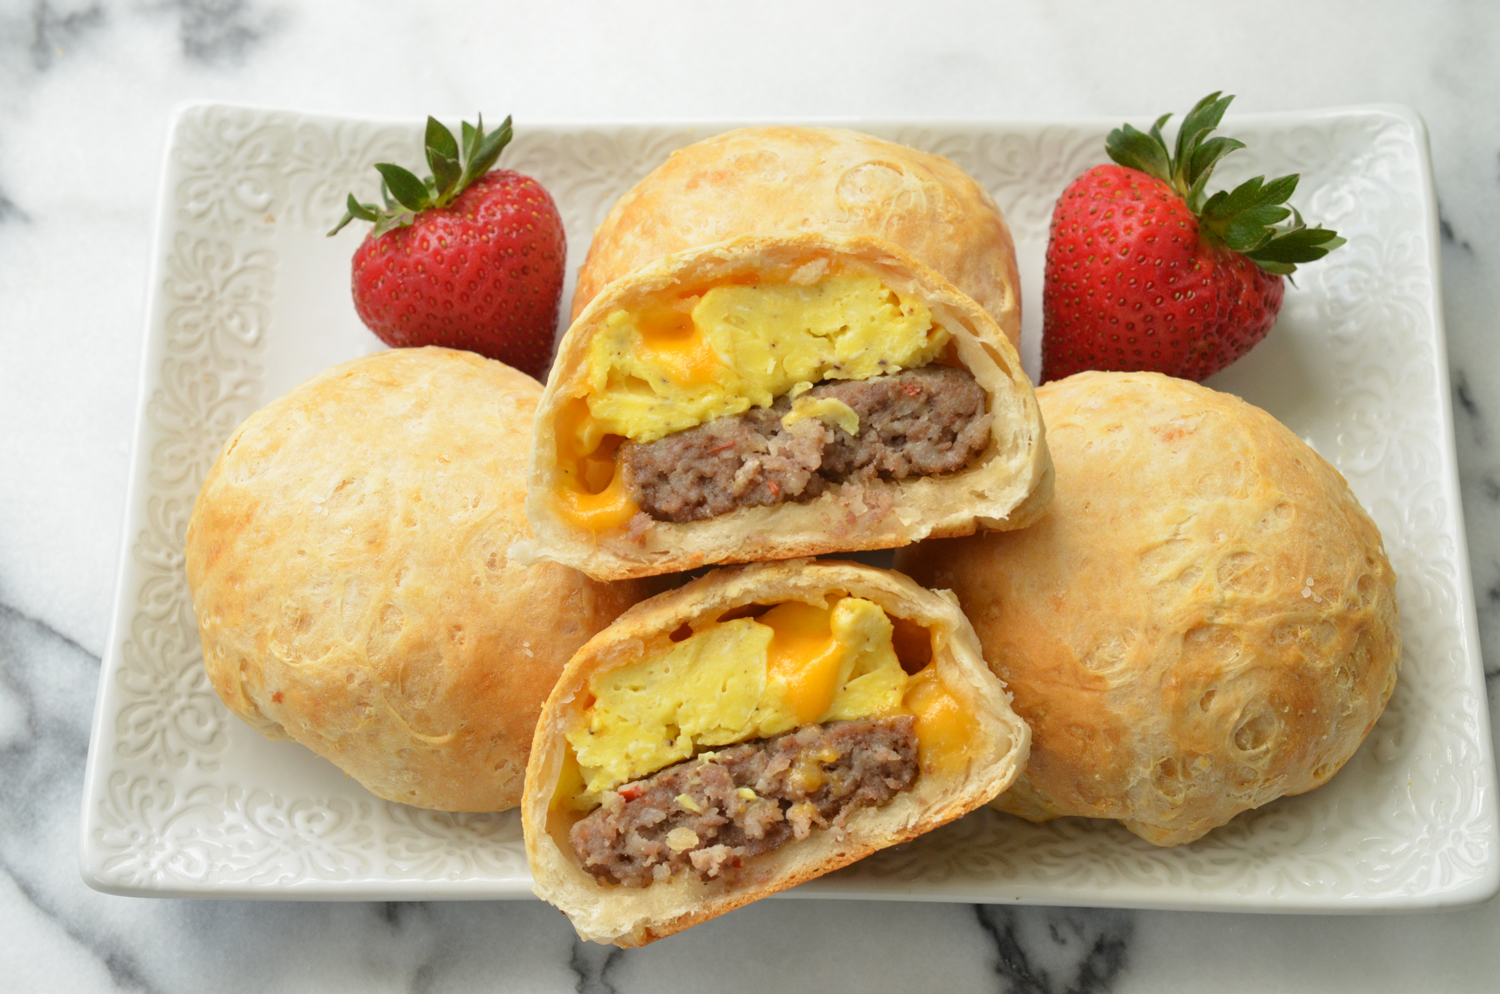 Sausage Egg and Cheese Stuffed Breakfast Biscuits